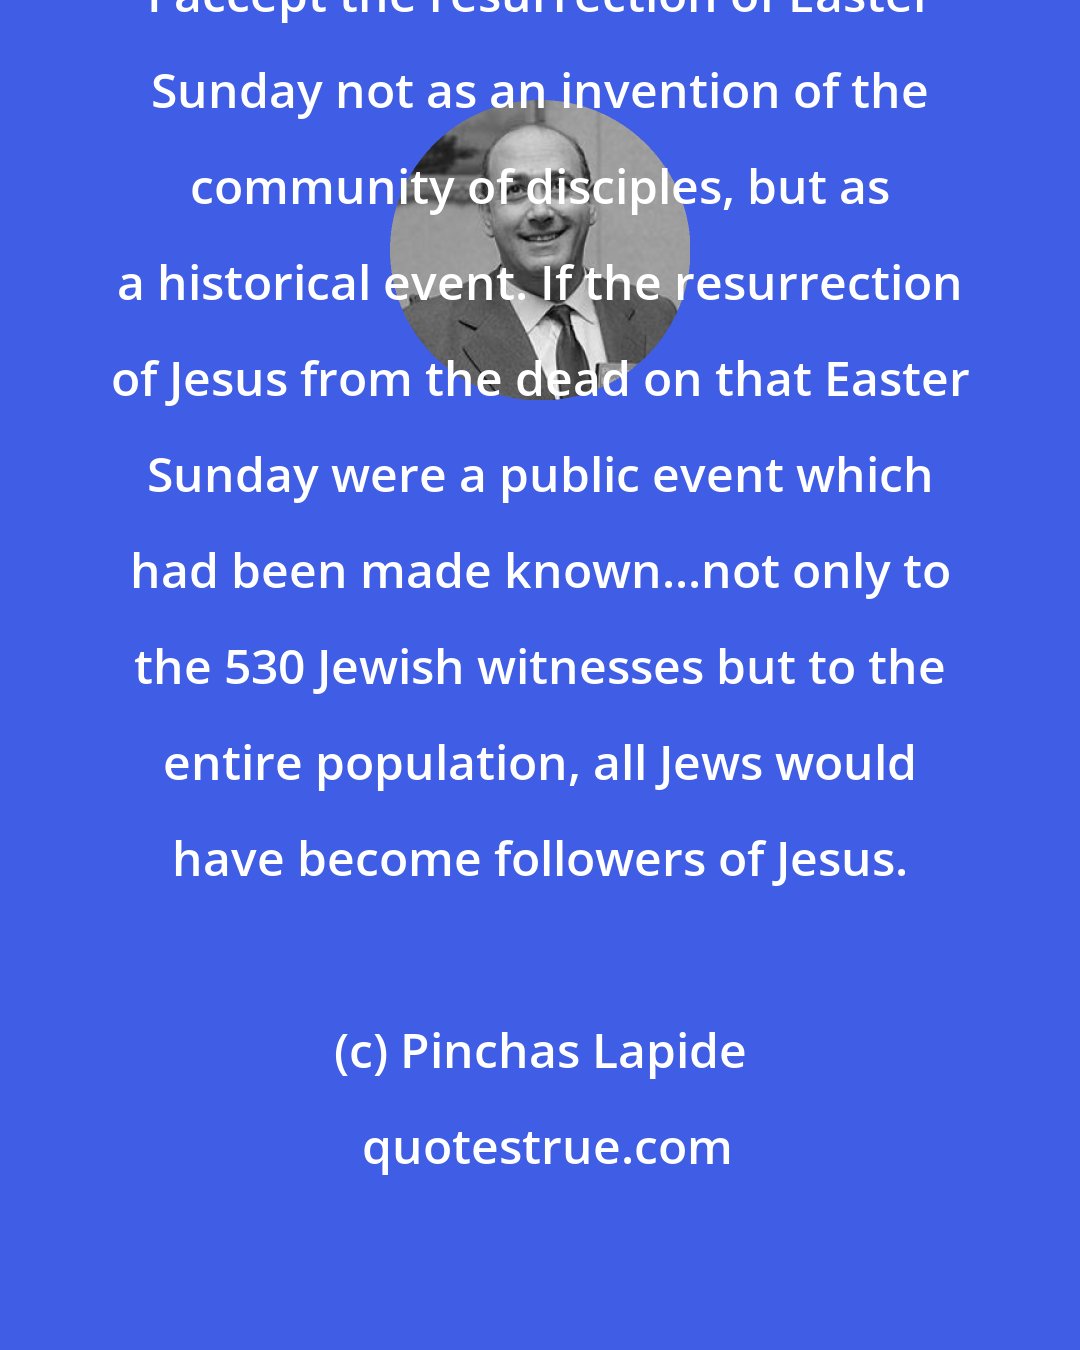 Pinchas Lapide: I accept the resurrection of Easter Sunday not as an invention of the community of disciples, but as a historical event. If the resurrection of Jesus from the dead on that Easter Sunday were a public event which had been made known...not only to the 530 Jewish witnesses but to the entire population, all Jews would have become followers of Jesus.